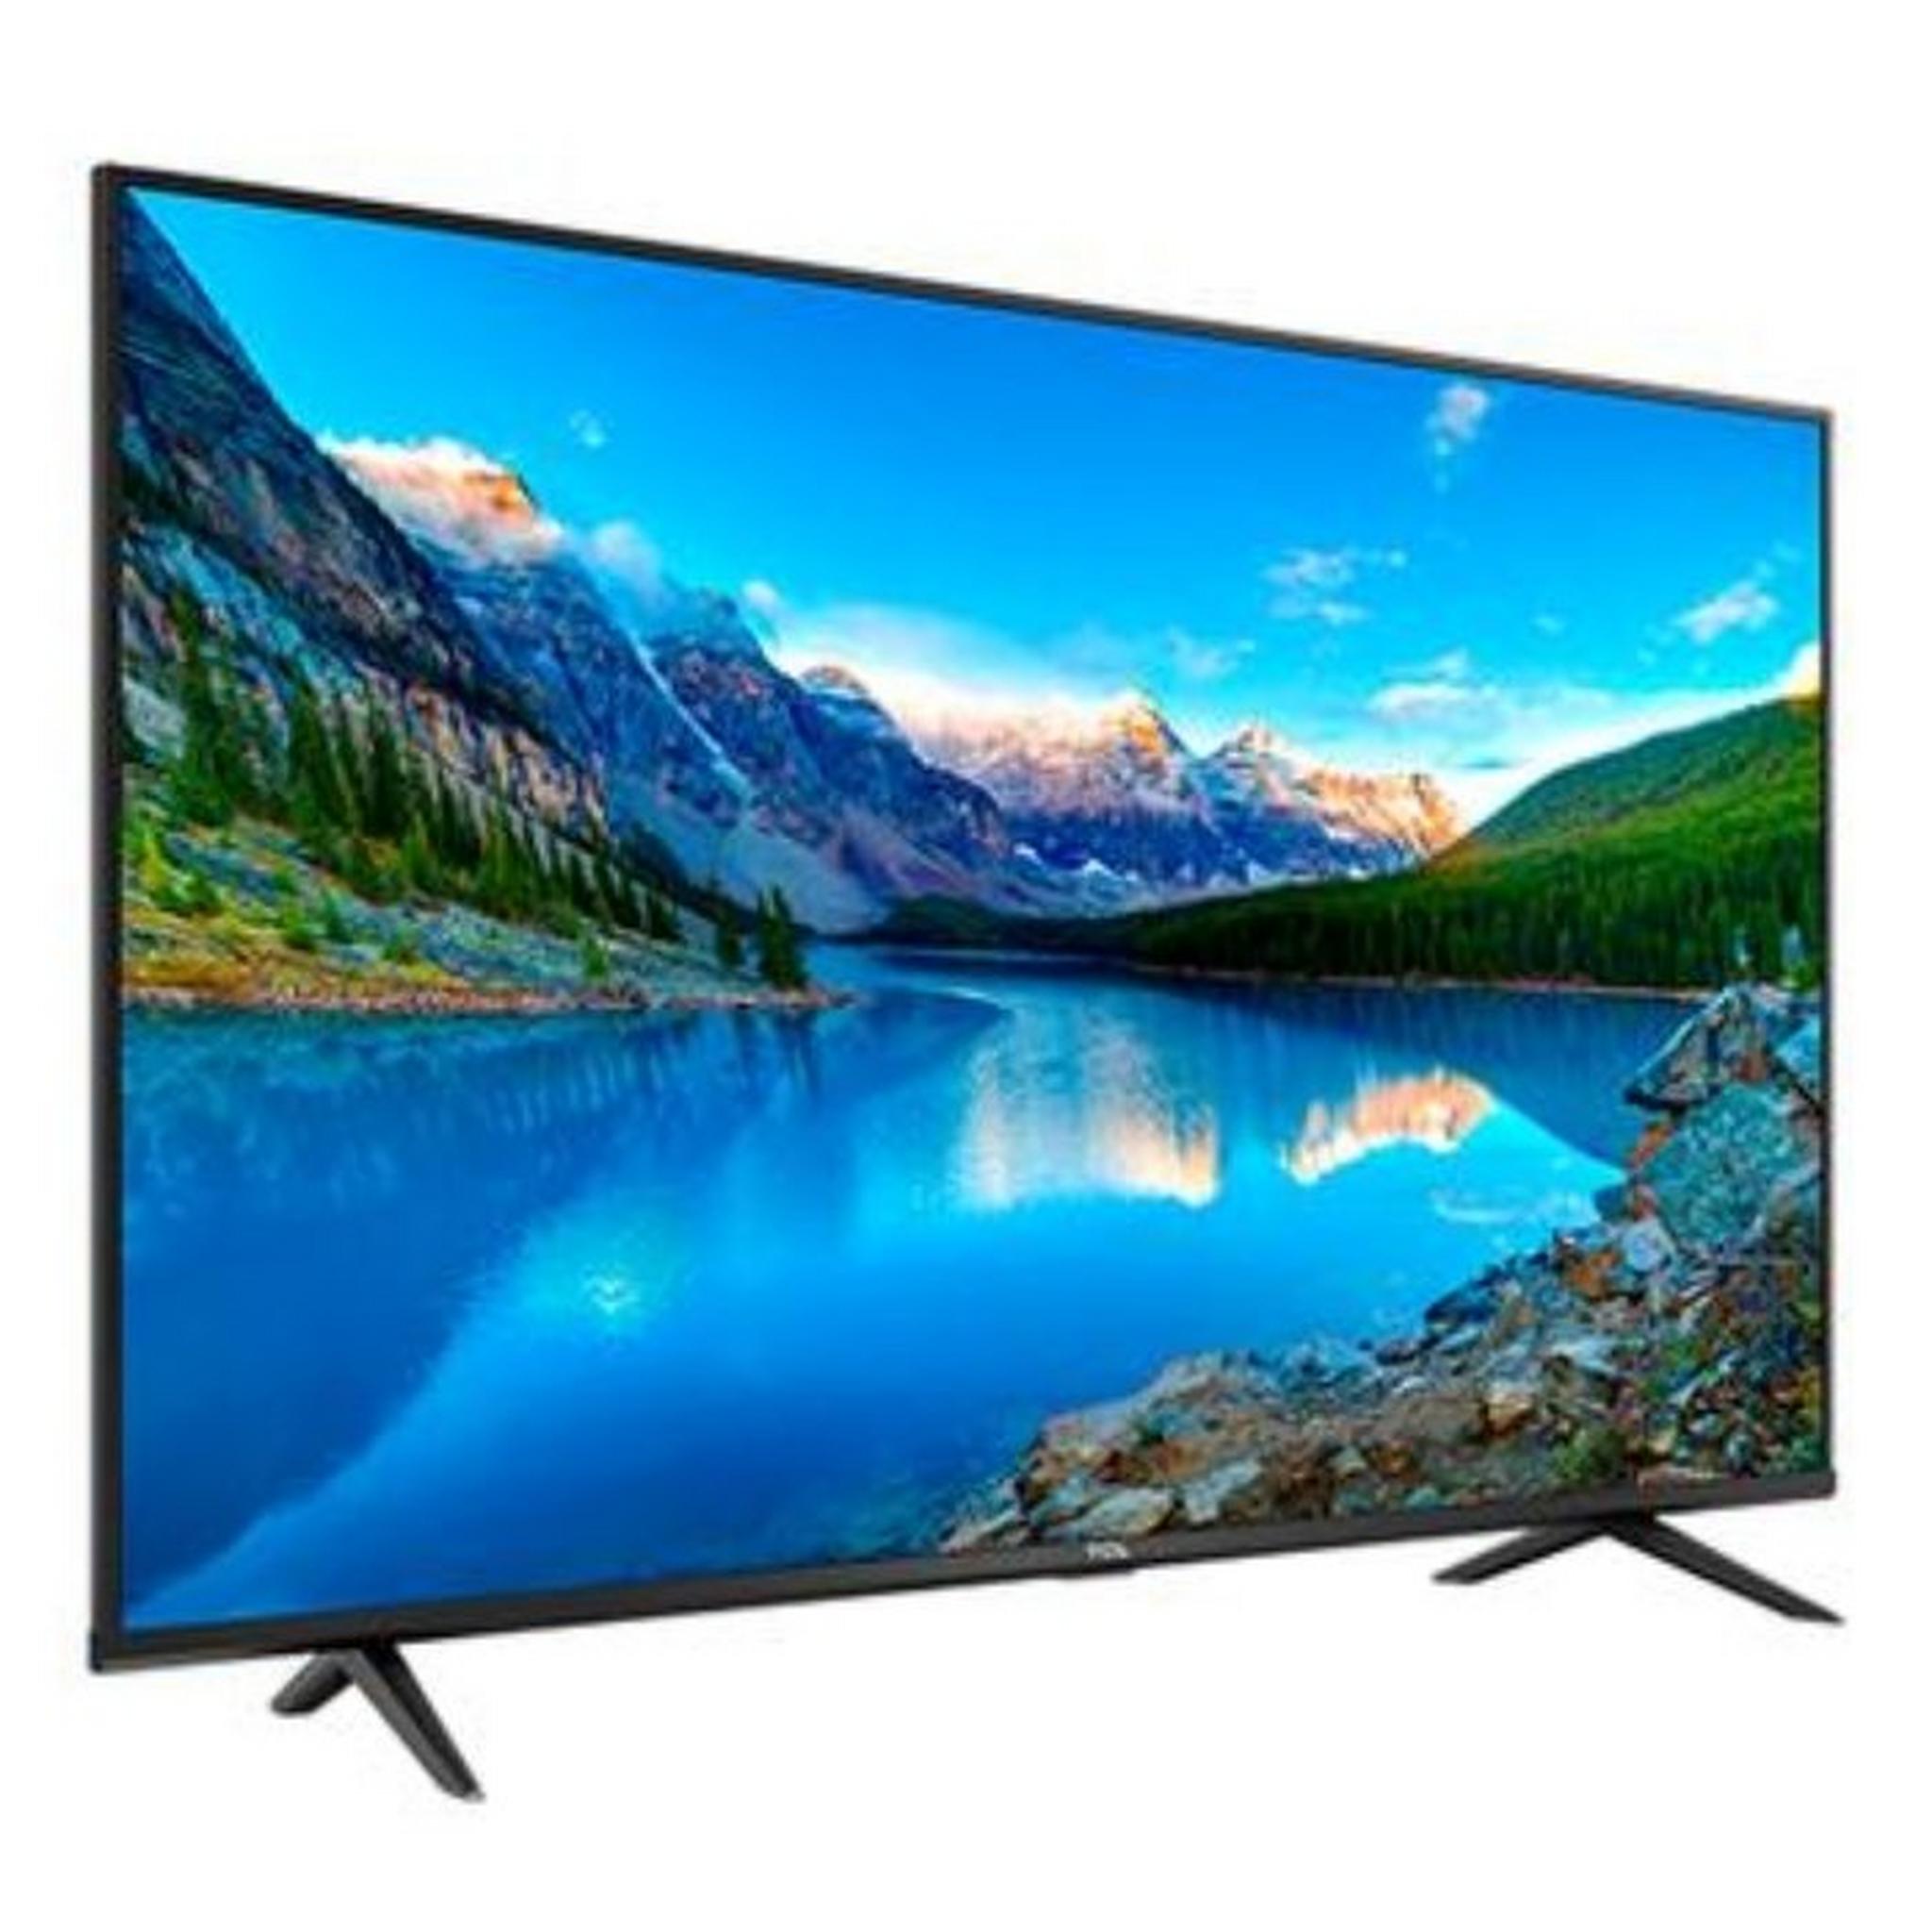 TCL 43-inch Android 4K UHD LED TV (43P615)